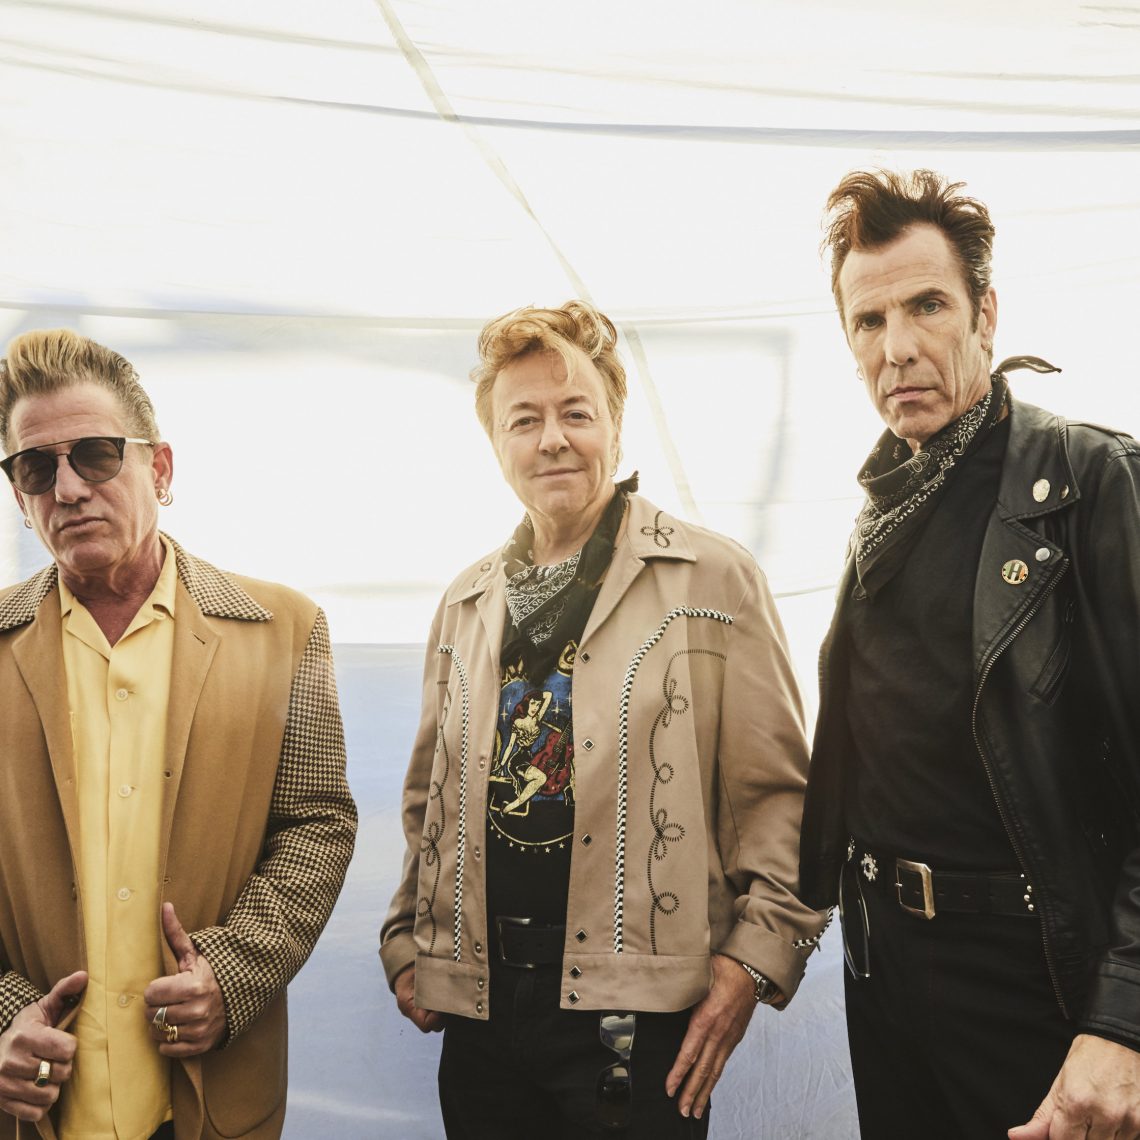 Stray Cats announce first album in 26 years + 40th anniversary tour